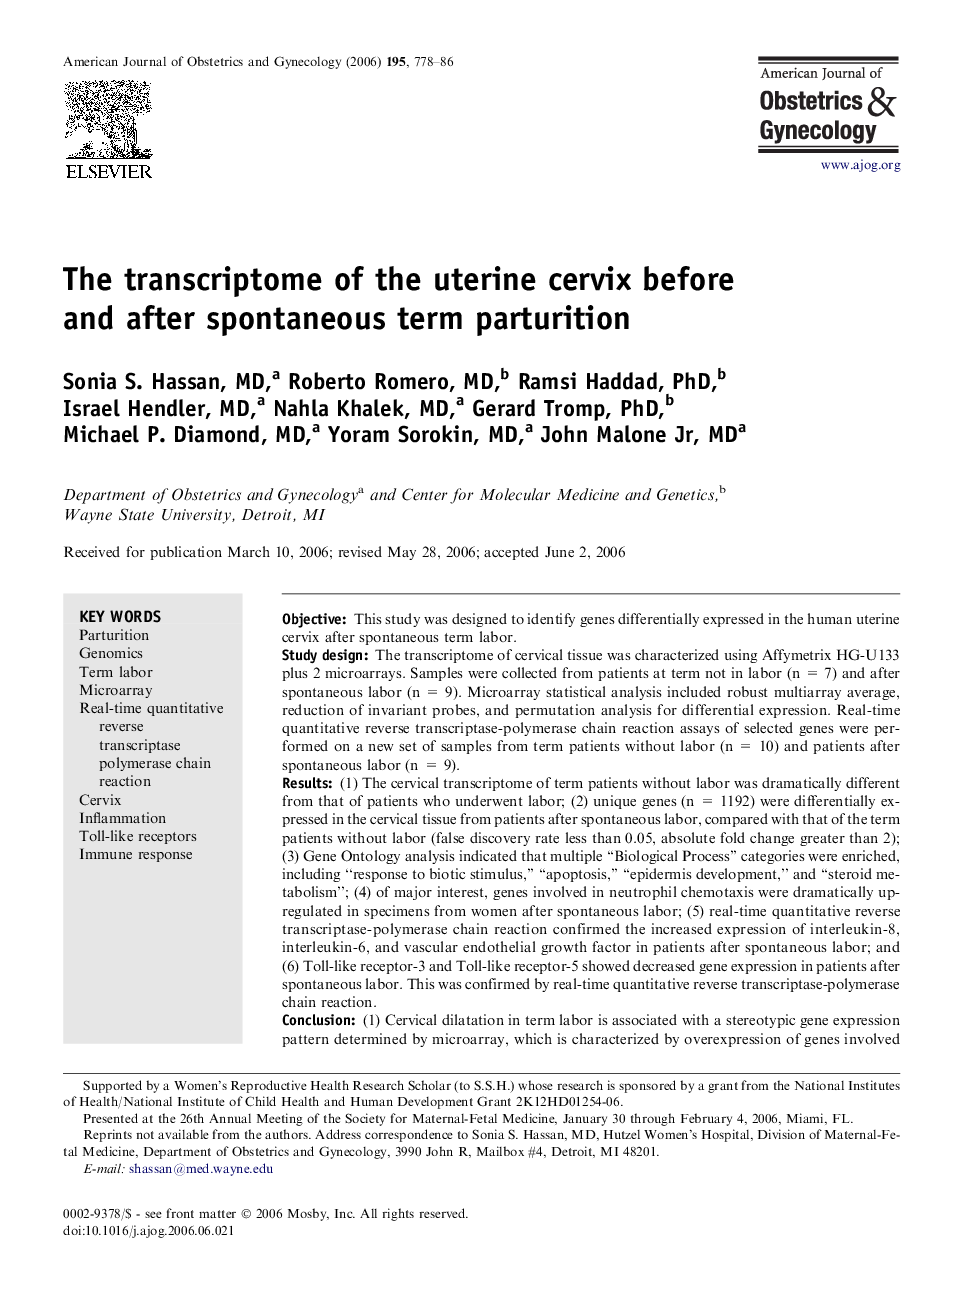 The transcriptome of the uterine cervix before and after spontaneous term parturition 